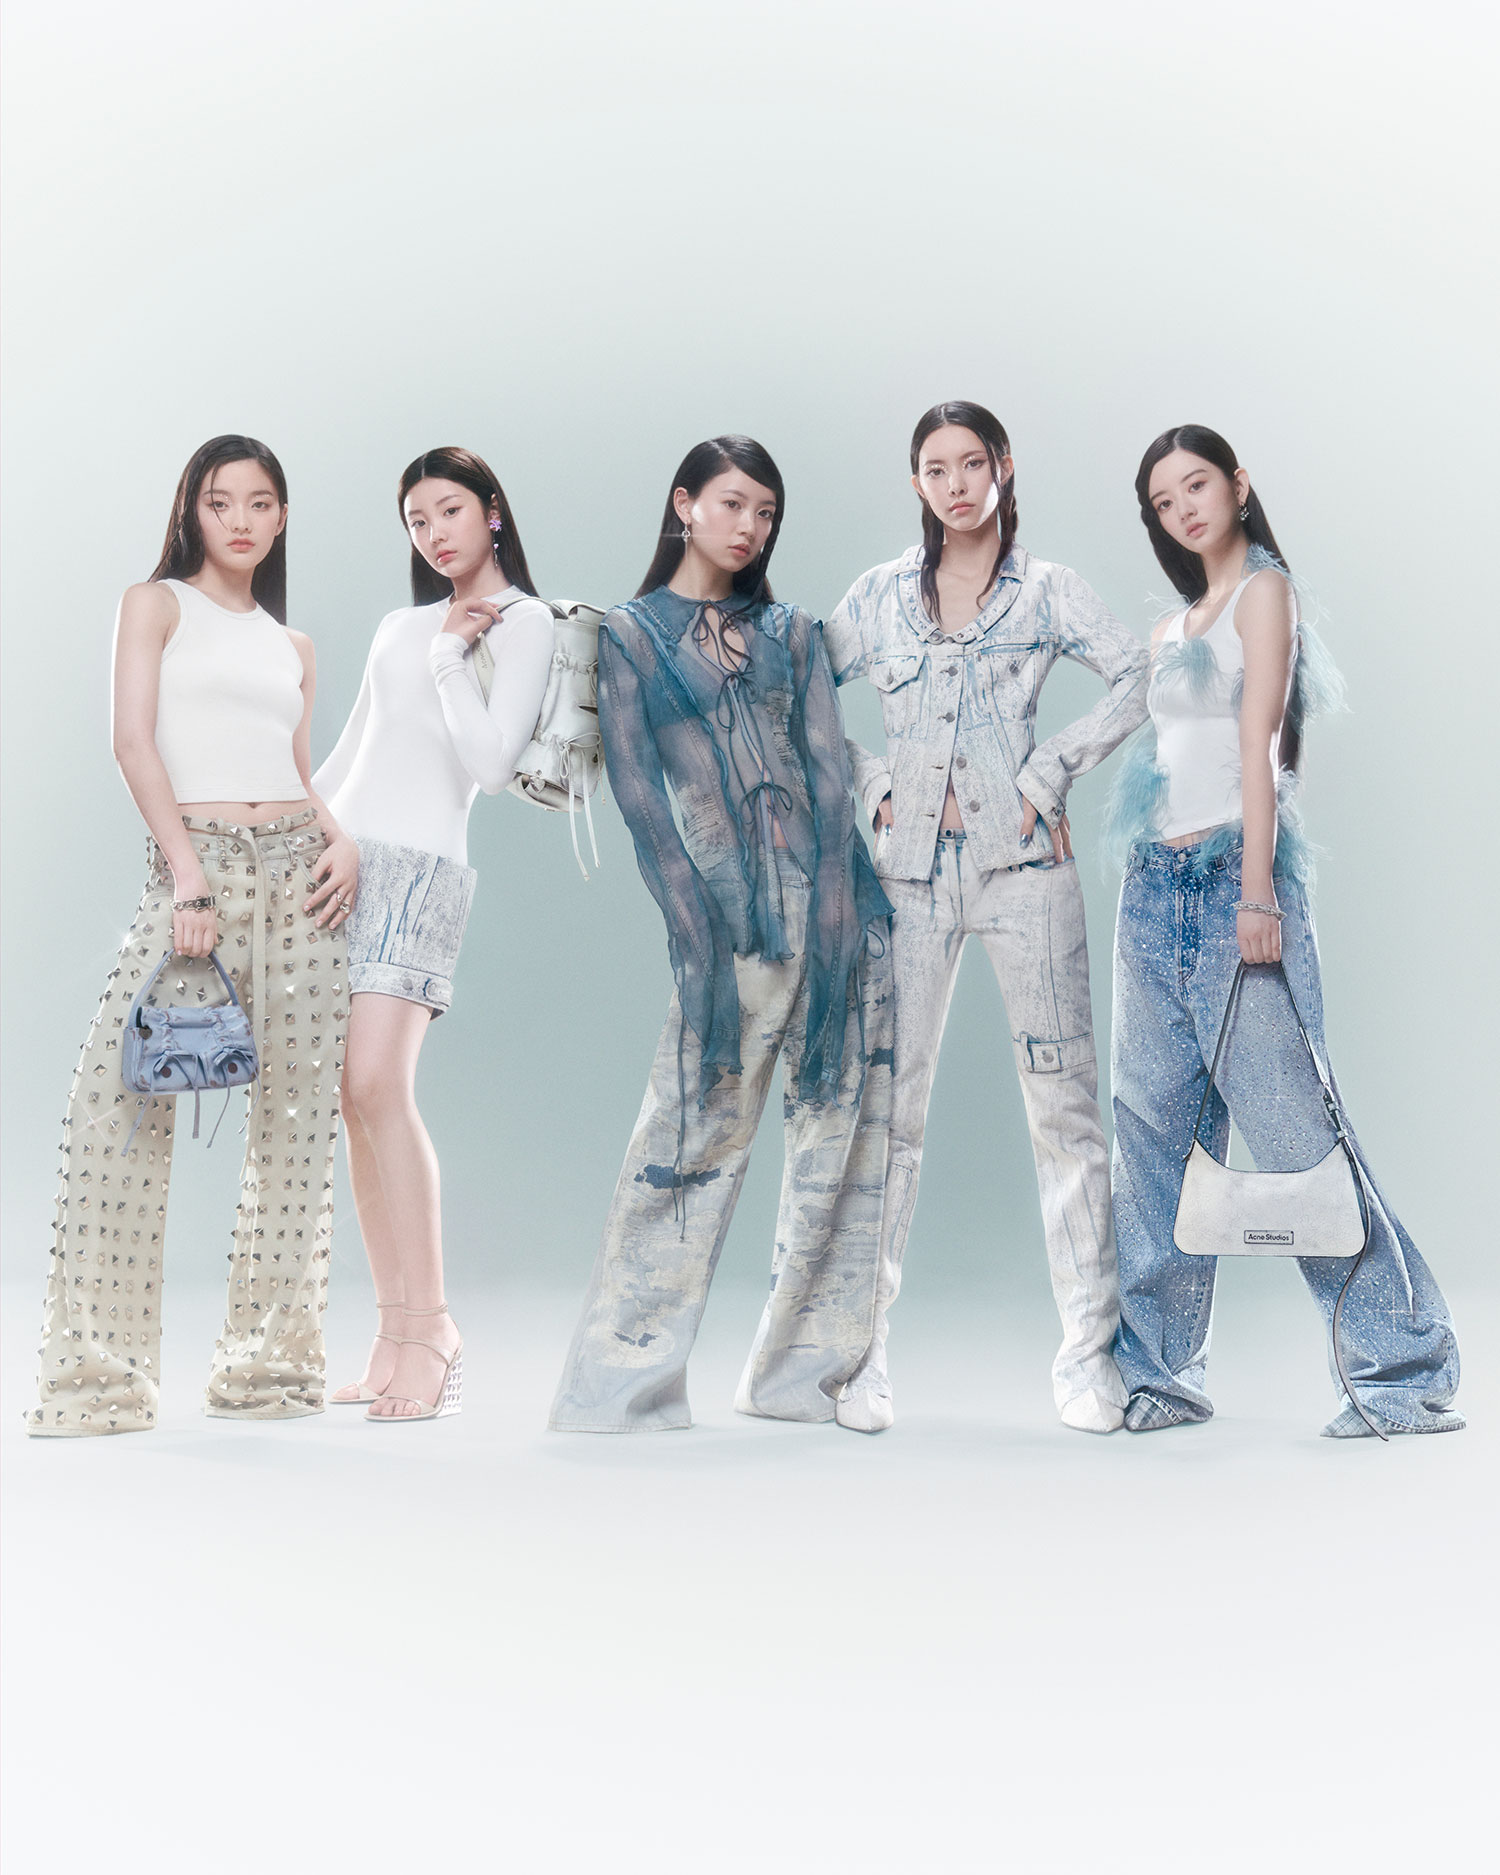 Acne Studios' New Campaign with K-Pop Sensation ILLIT | The Fashionography